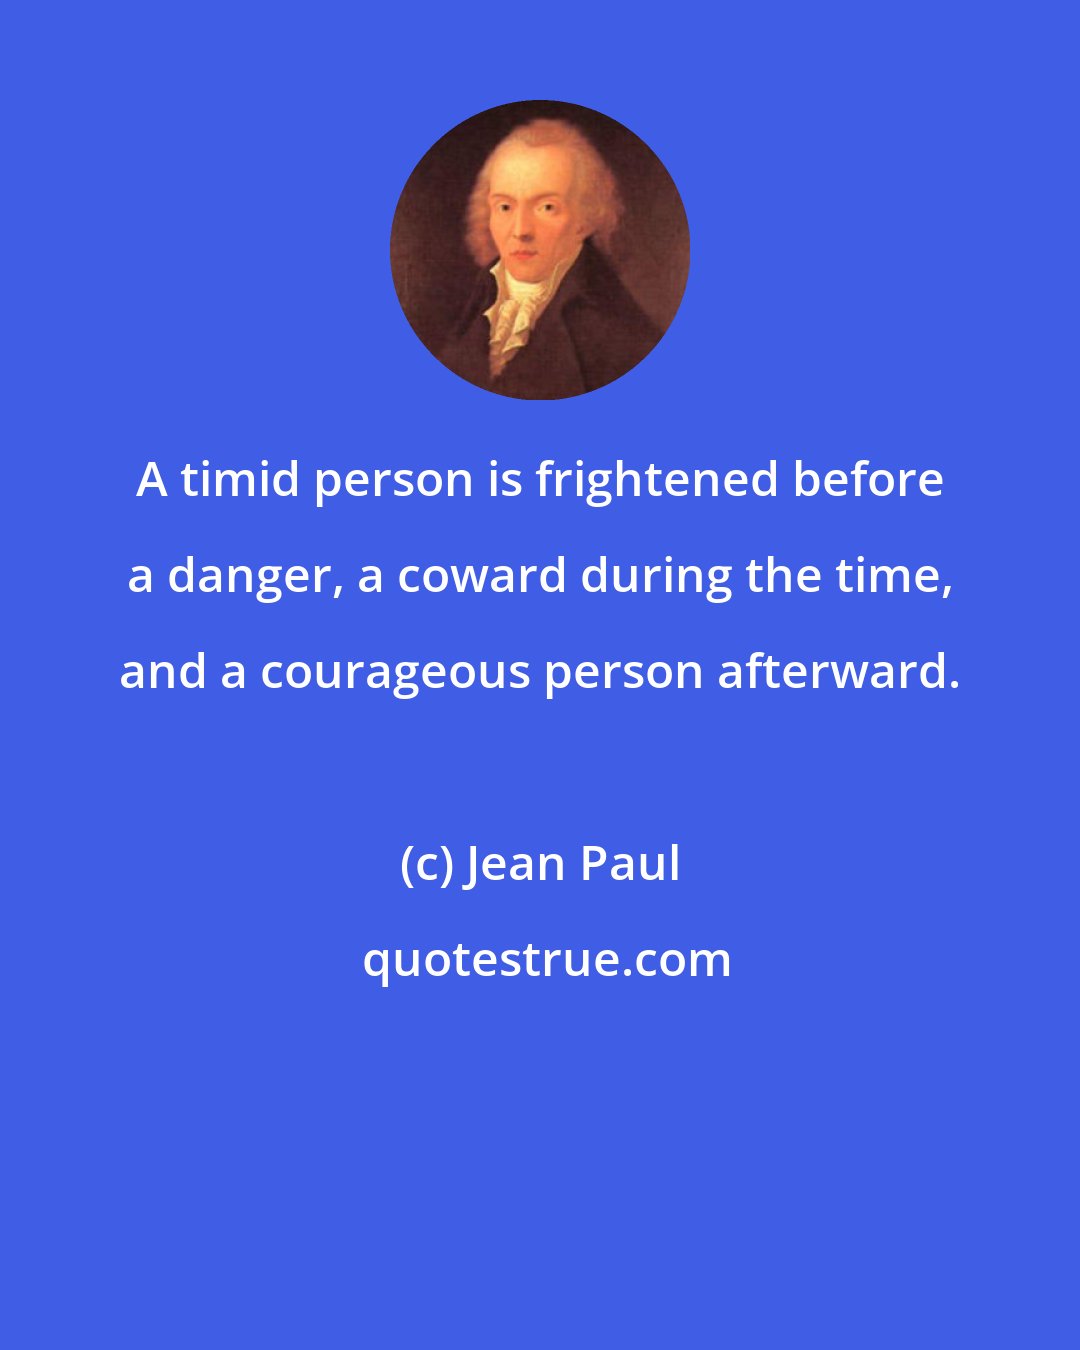 Jean Paul: A timid person is frightened before a danger, a coward during the time, and a courageous person afterward.